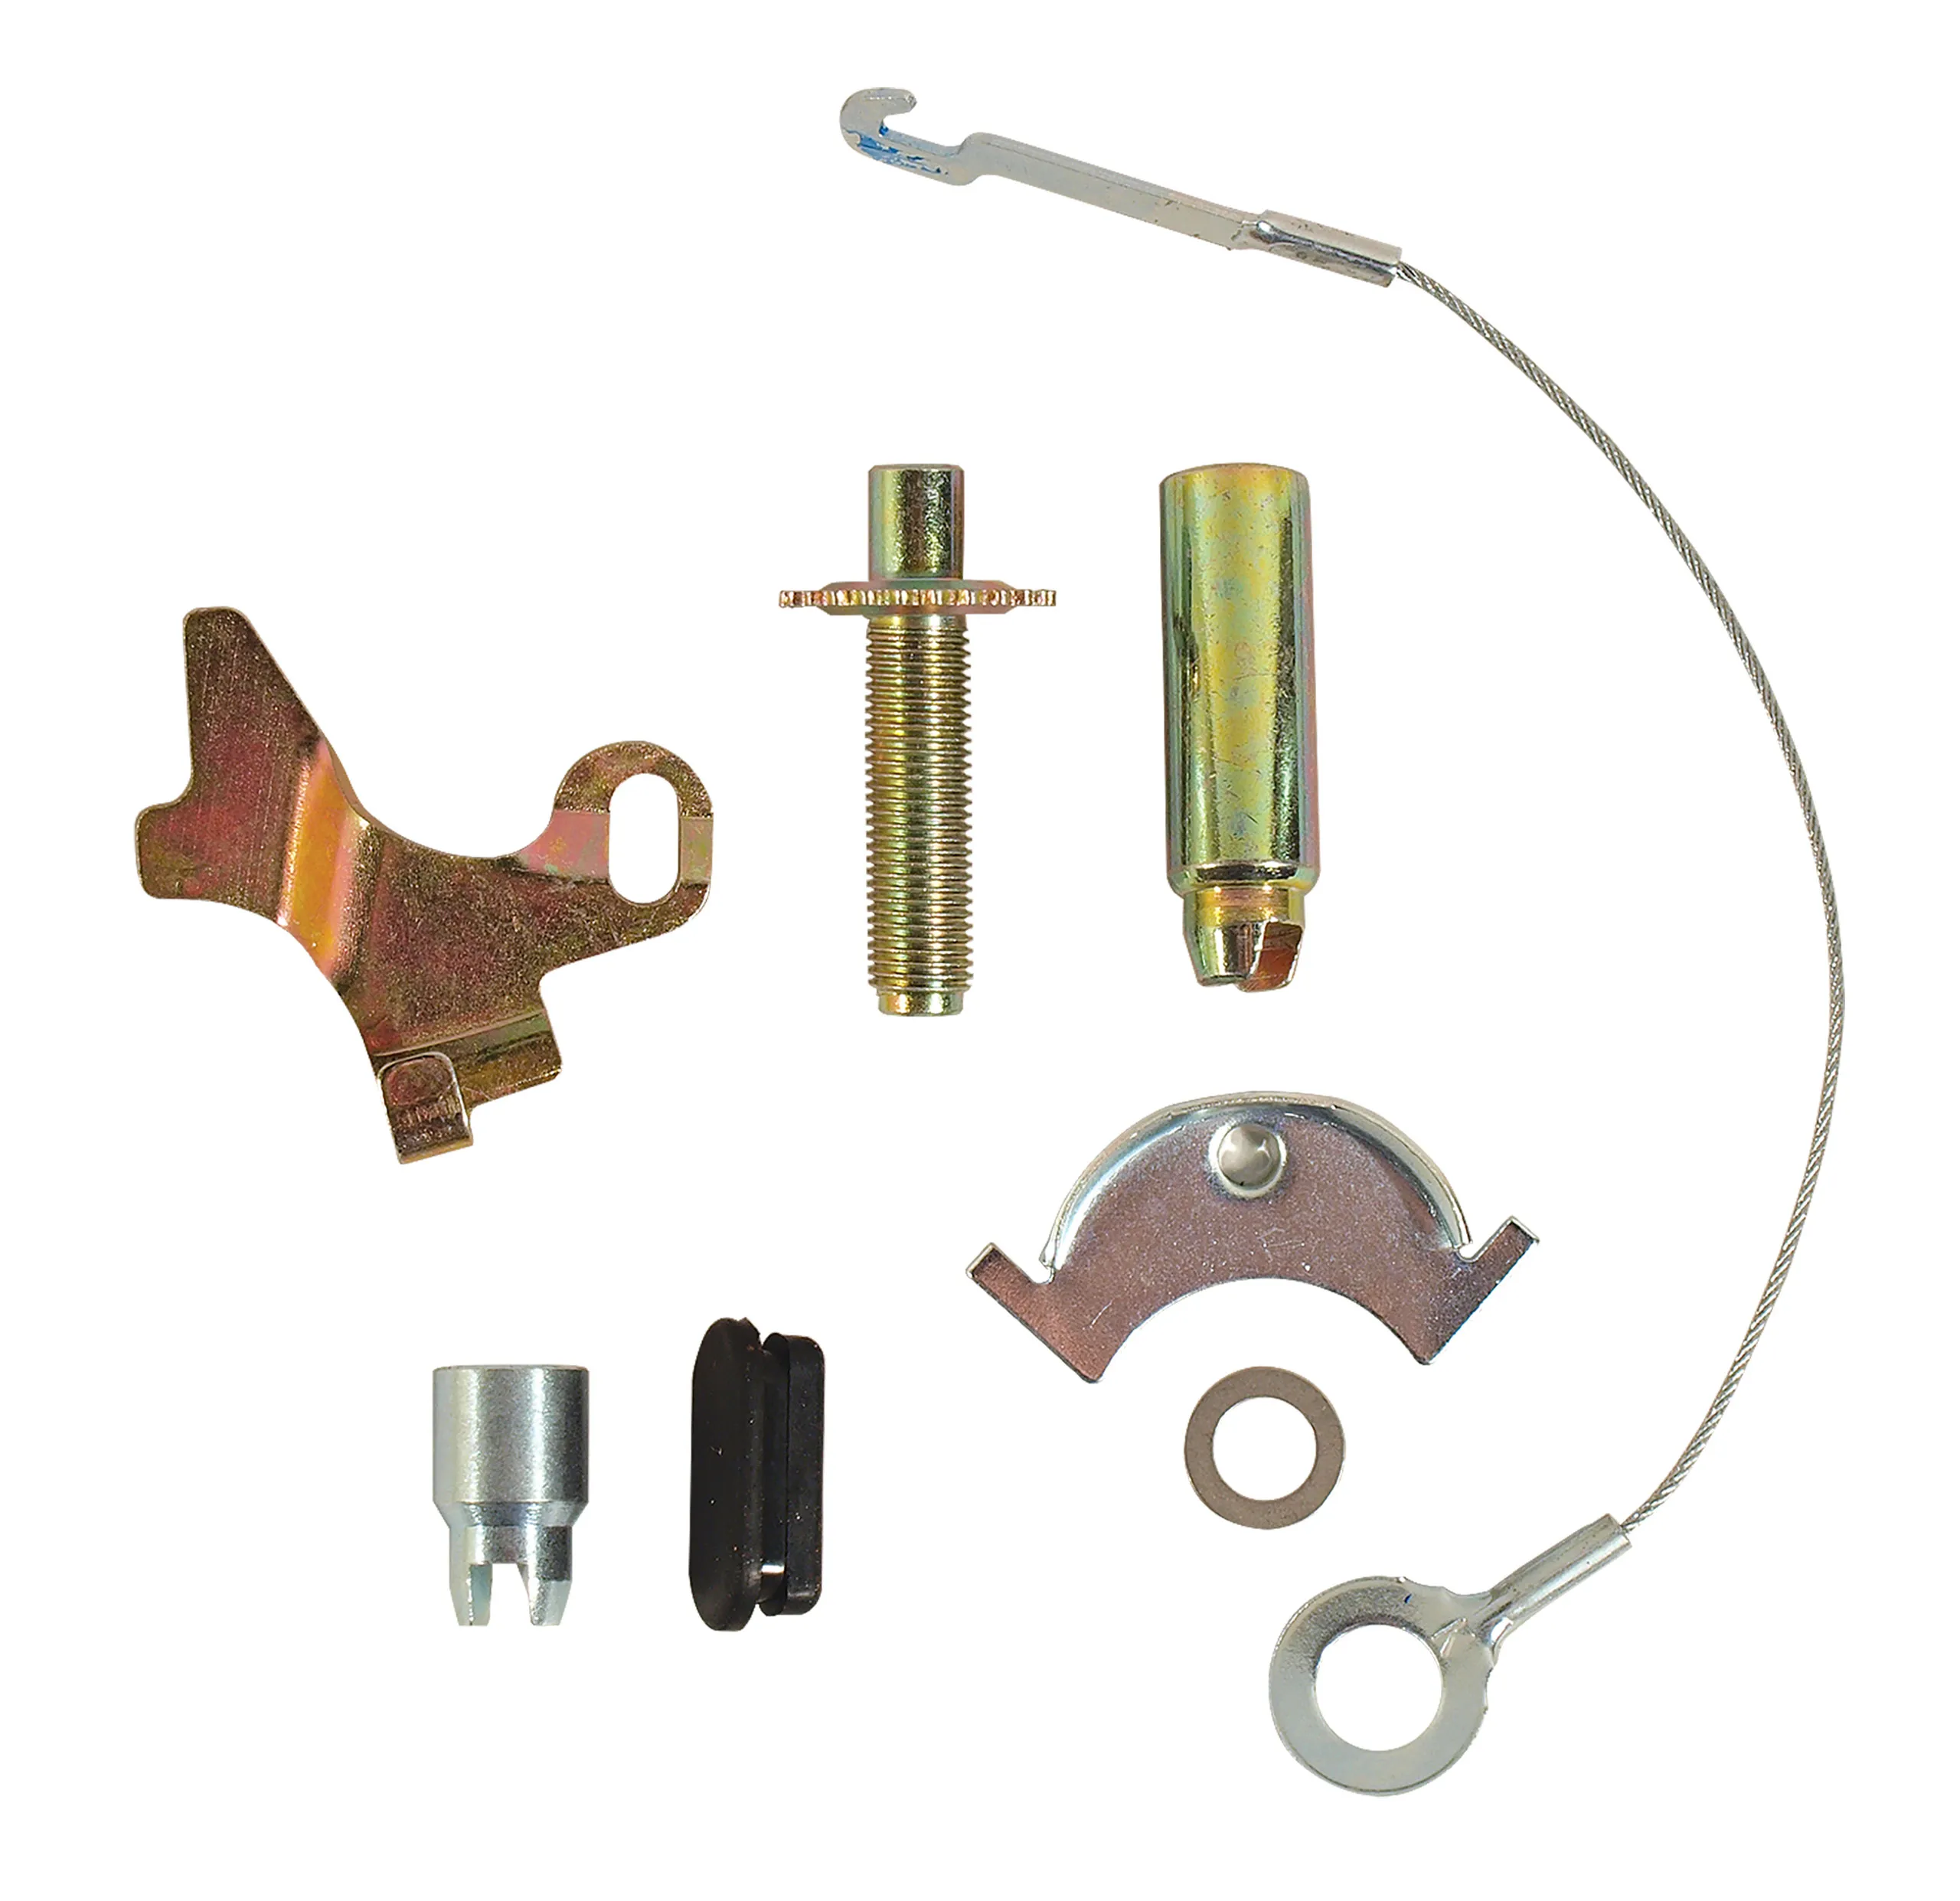 Auto Accessories of America 1964-1970 Ford Mustang Brake Shoe Self Adjuster Repair Kit - Front or Rear RH - V8